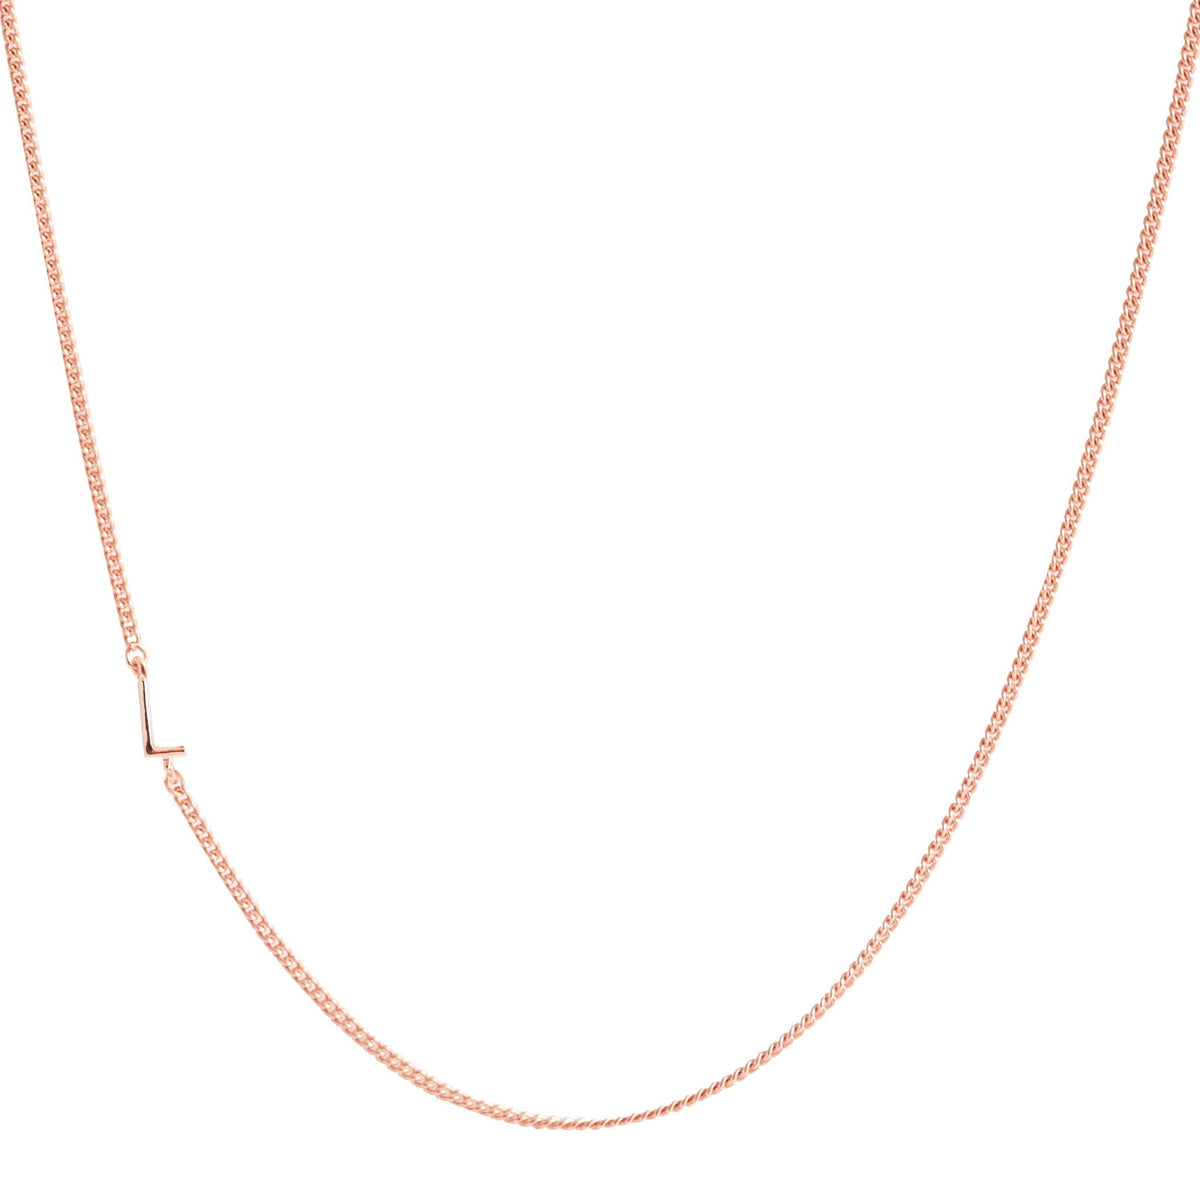 NOTABLE OFFSET INITIAL NECKLACE - L - GOLD, ROSE GOLD, OR SILVER - SO PRETTY CARA COTTER